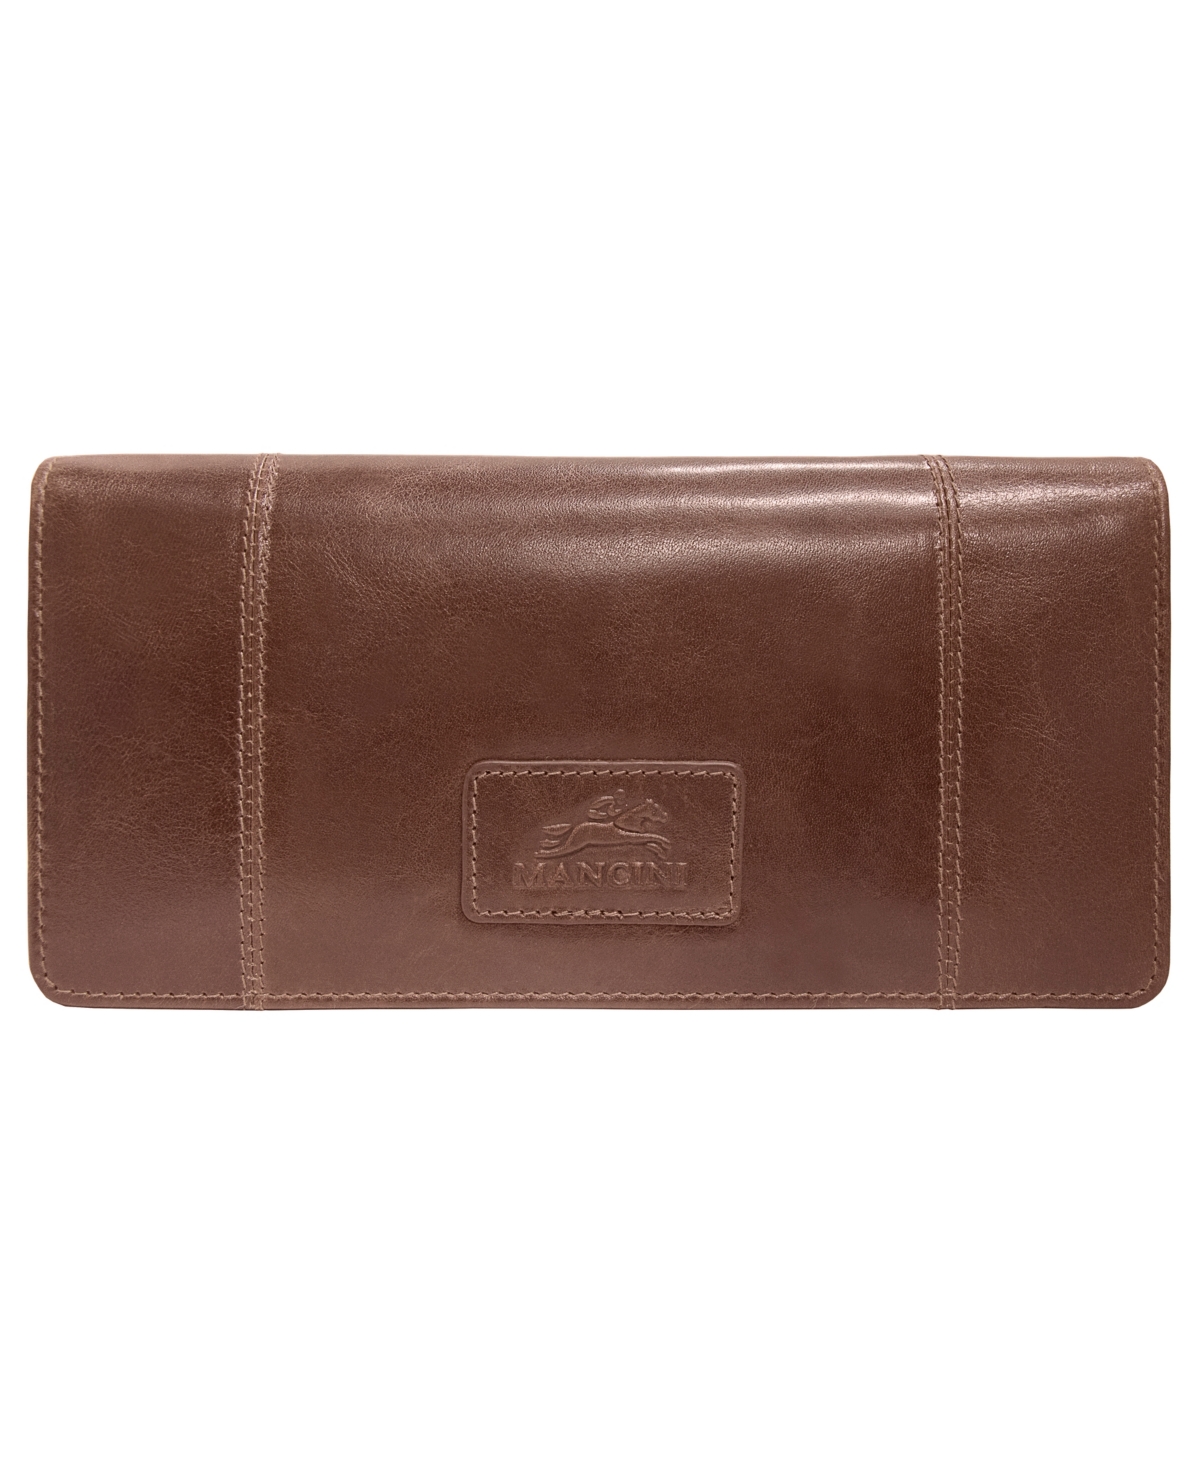 Casablanca Collection Rfid Secure Ladies Trifold Wallet - Camel